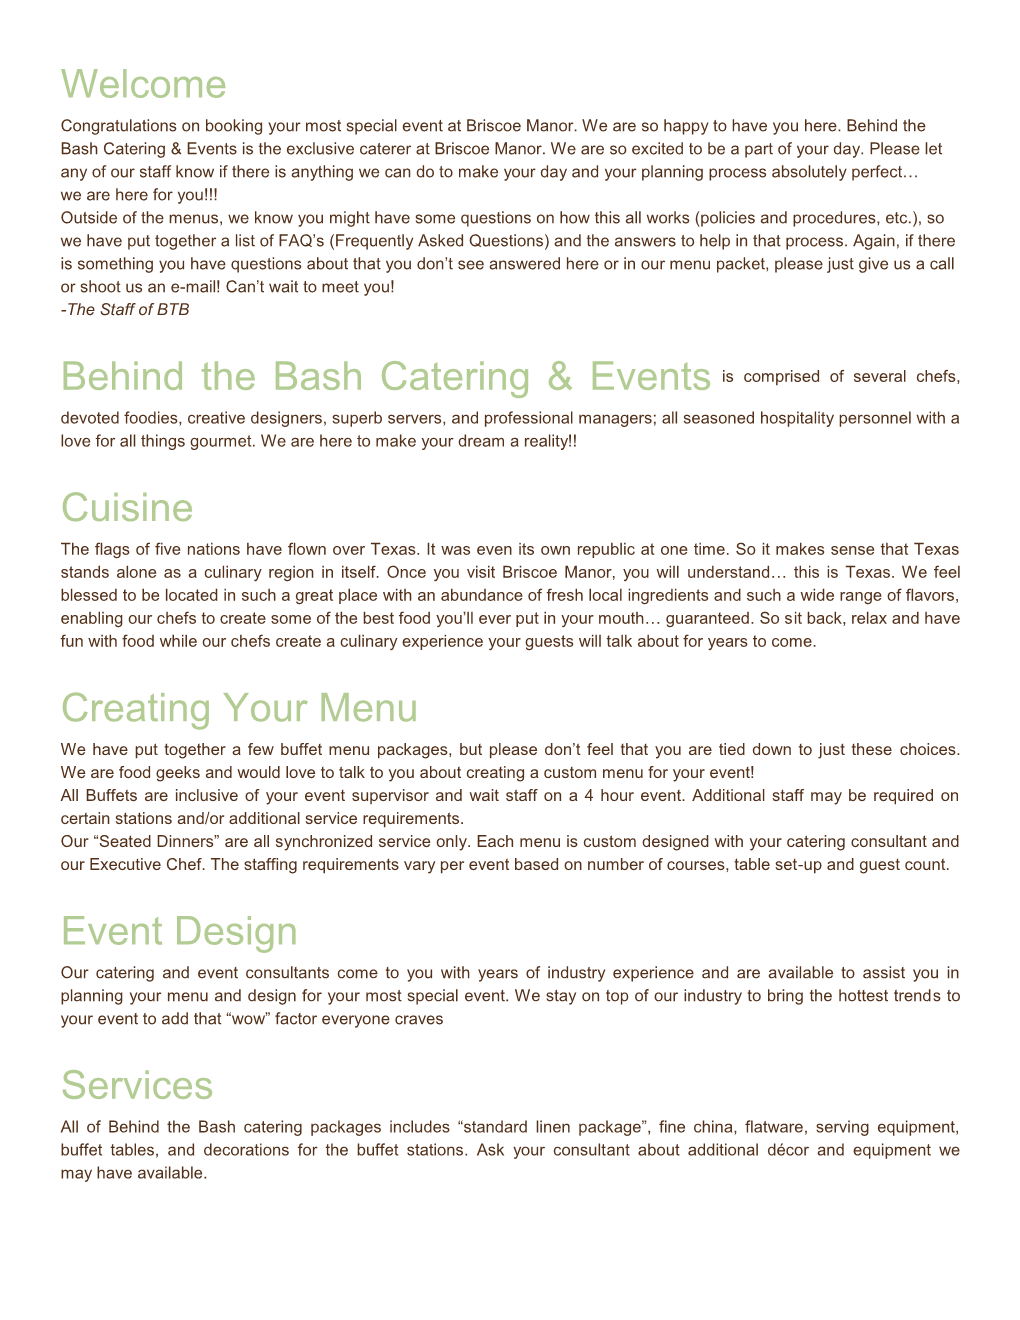 Behind the Bash Catering & Events Is Comprised of Several Chefs, Cuisine